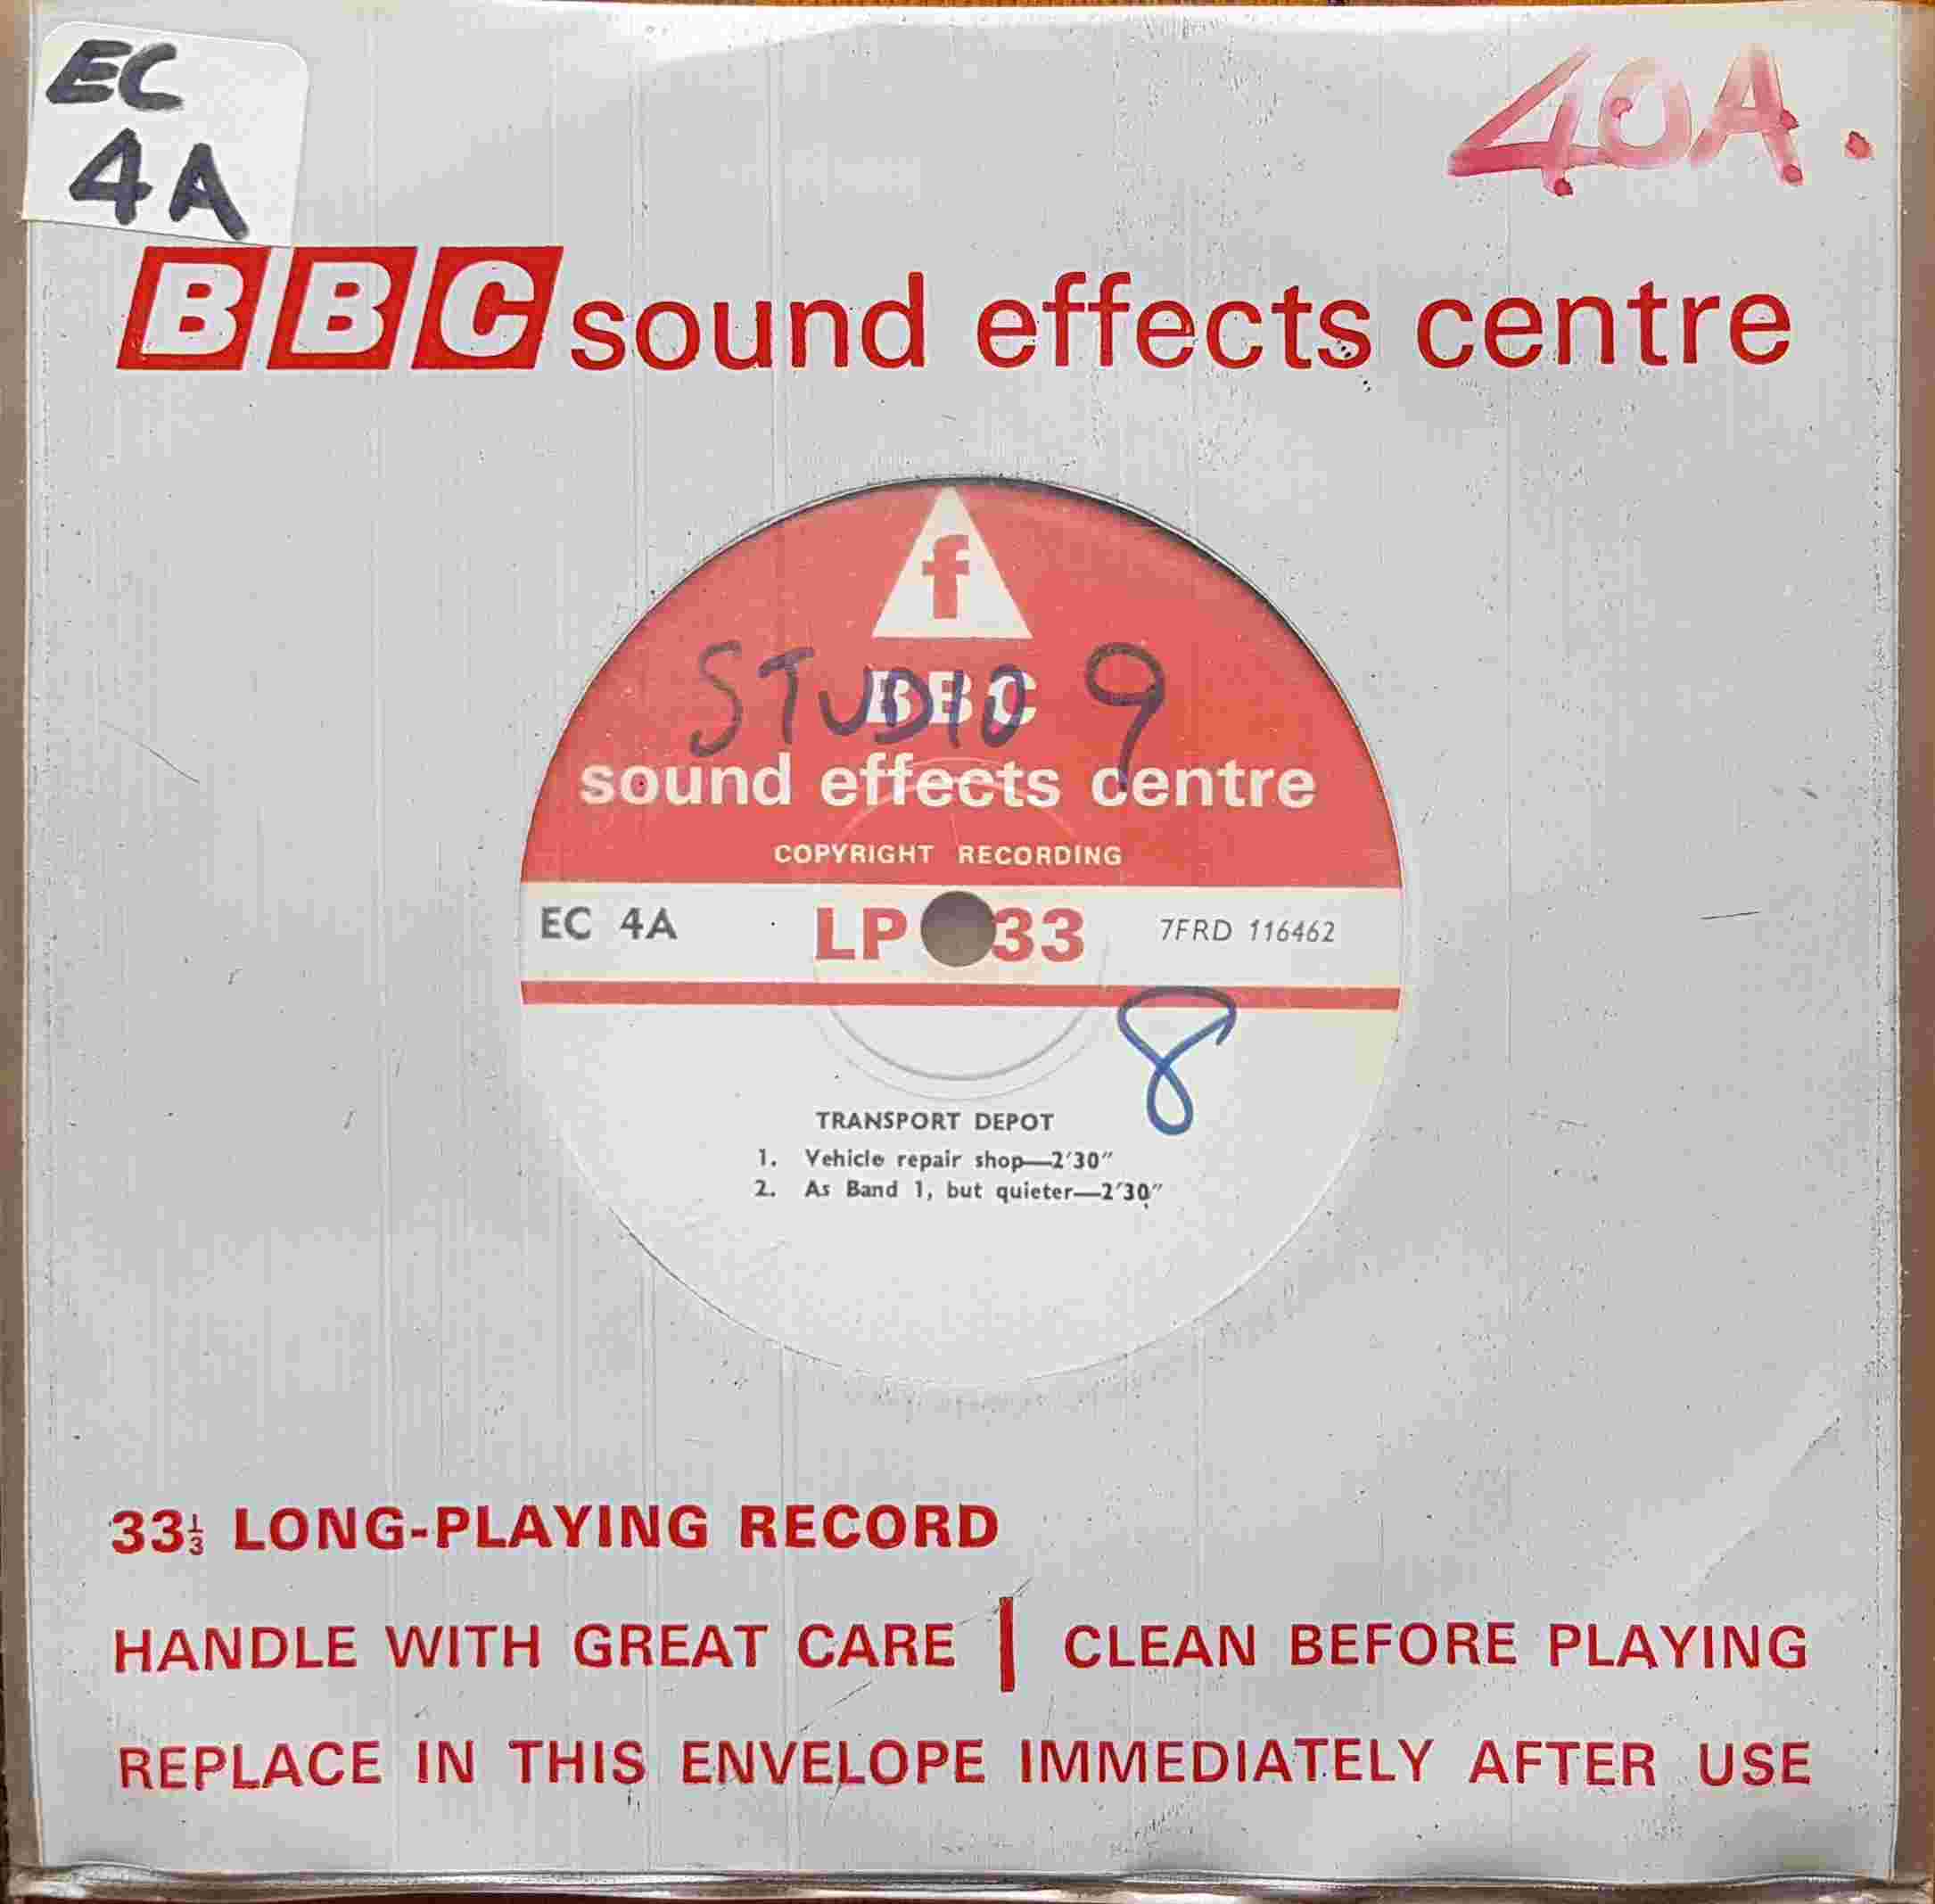 Picture of EC 4A Transport depot single by artist Not registered from the BBC records and Tapes library